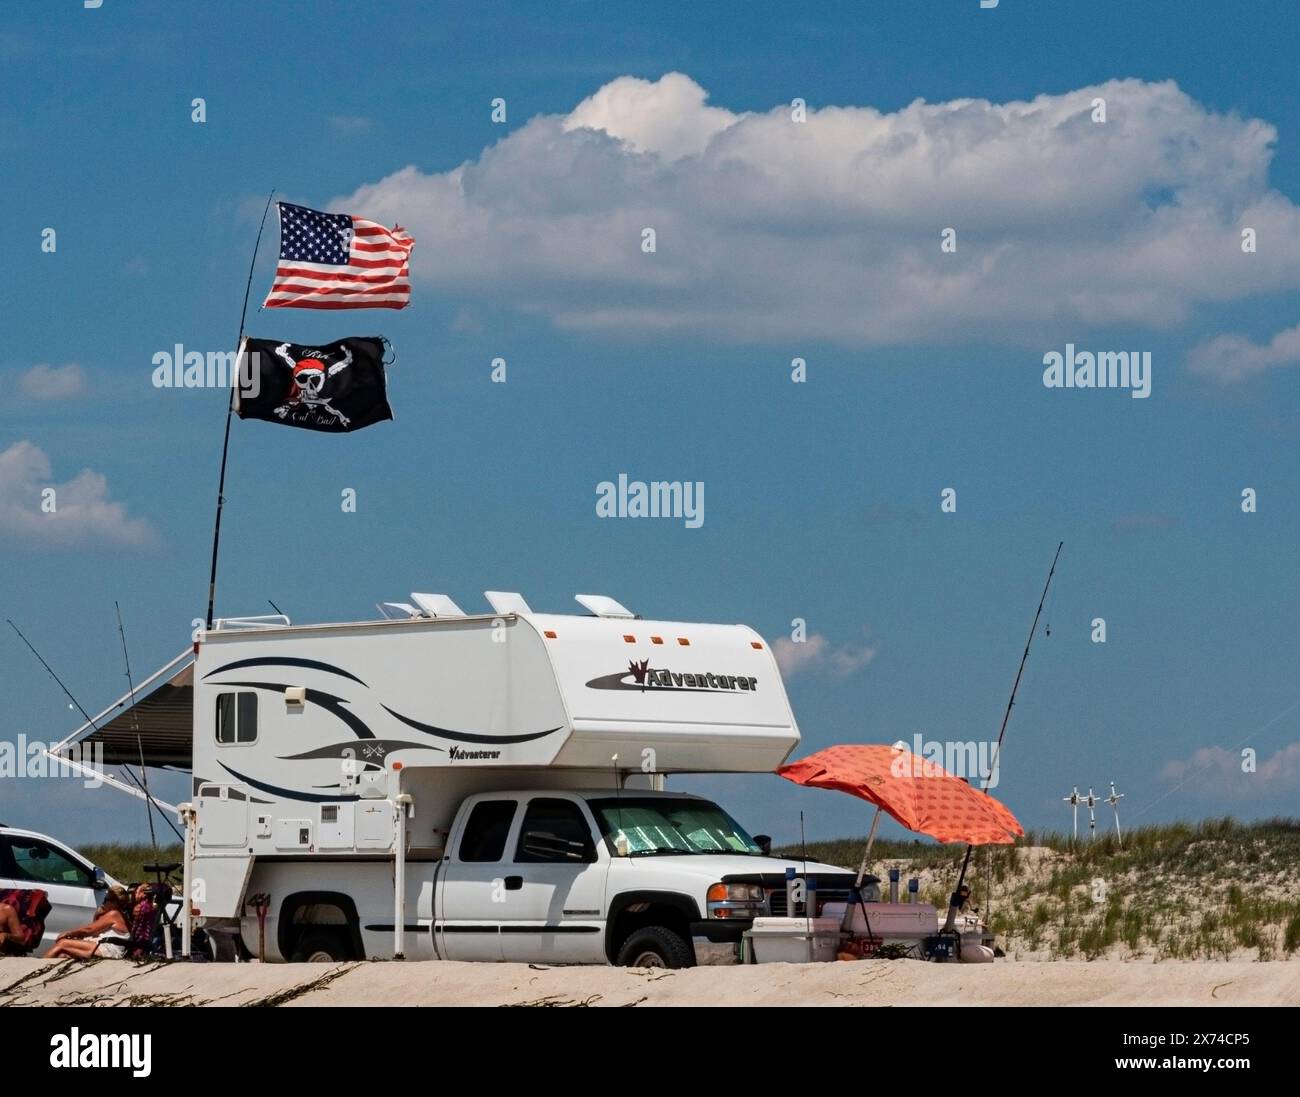 Robert Moses Beach, New York, USA - 14 July 2019: A camper is parked on the beach, with a flags flapping in the wind. Stock Photo